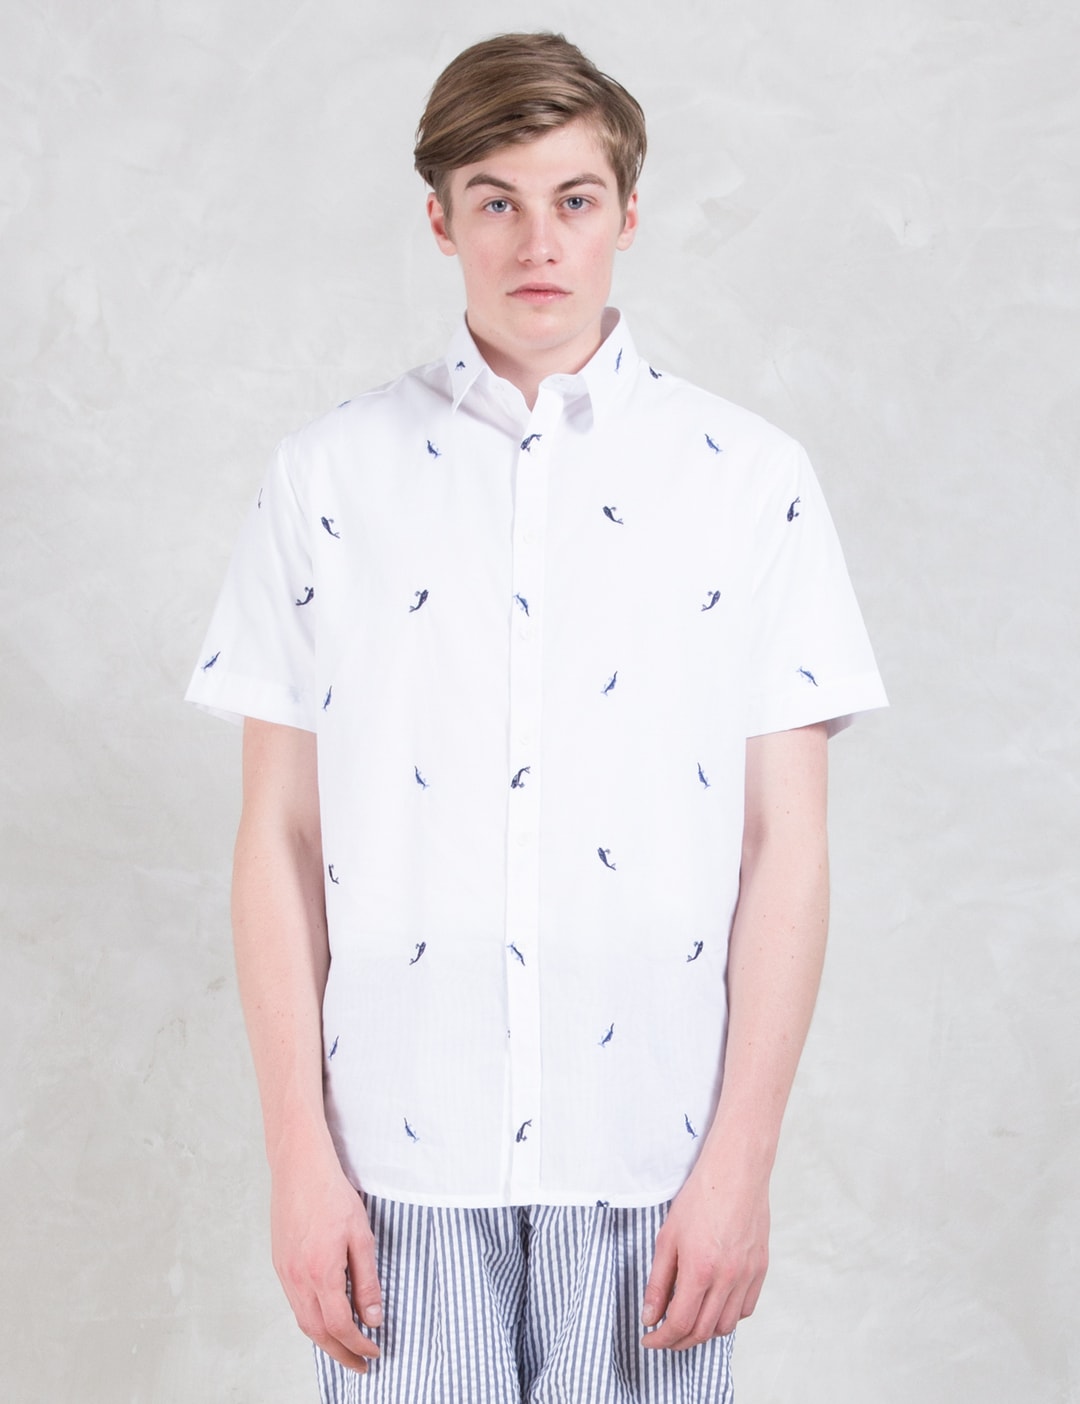 Munsoo Kwon - Fish Embroidery S/S Shirt | HBX - Globally Curated ...